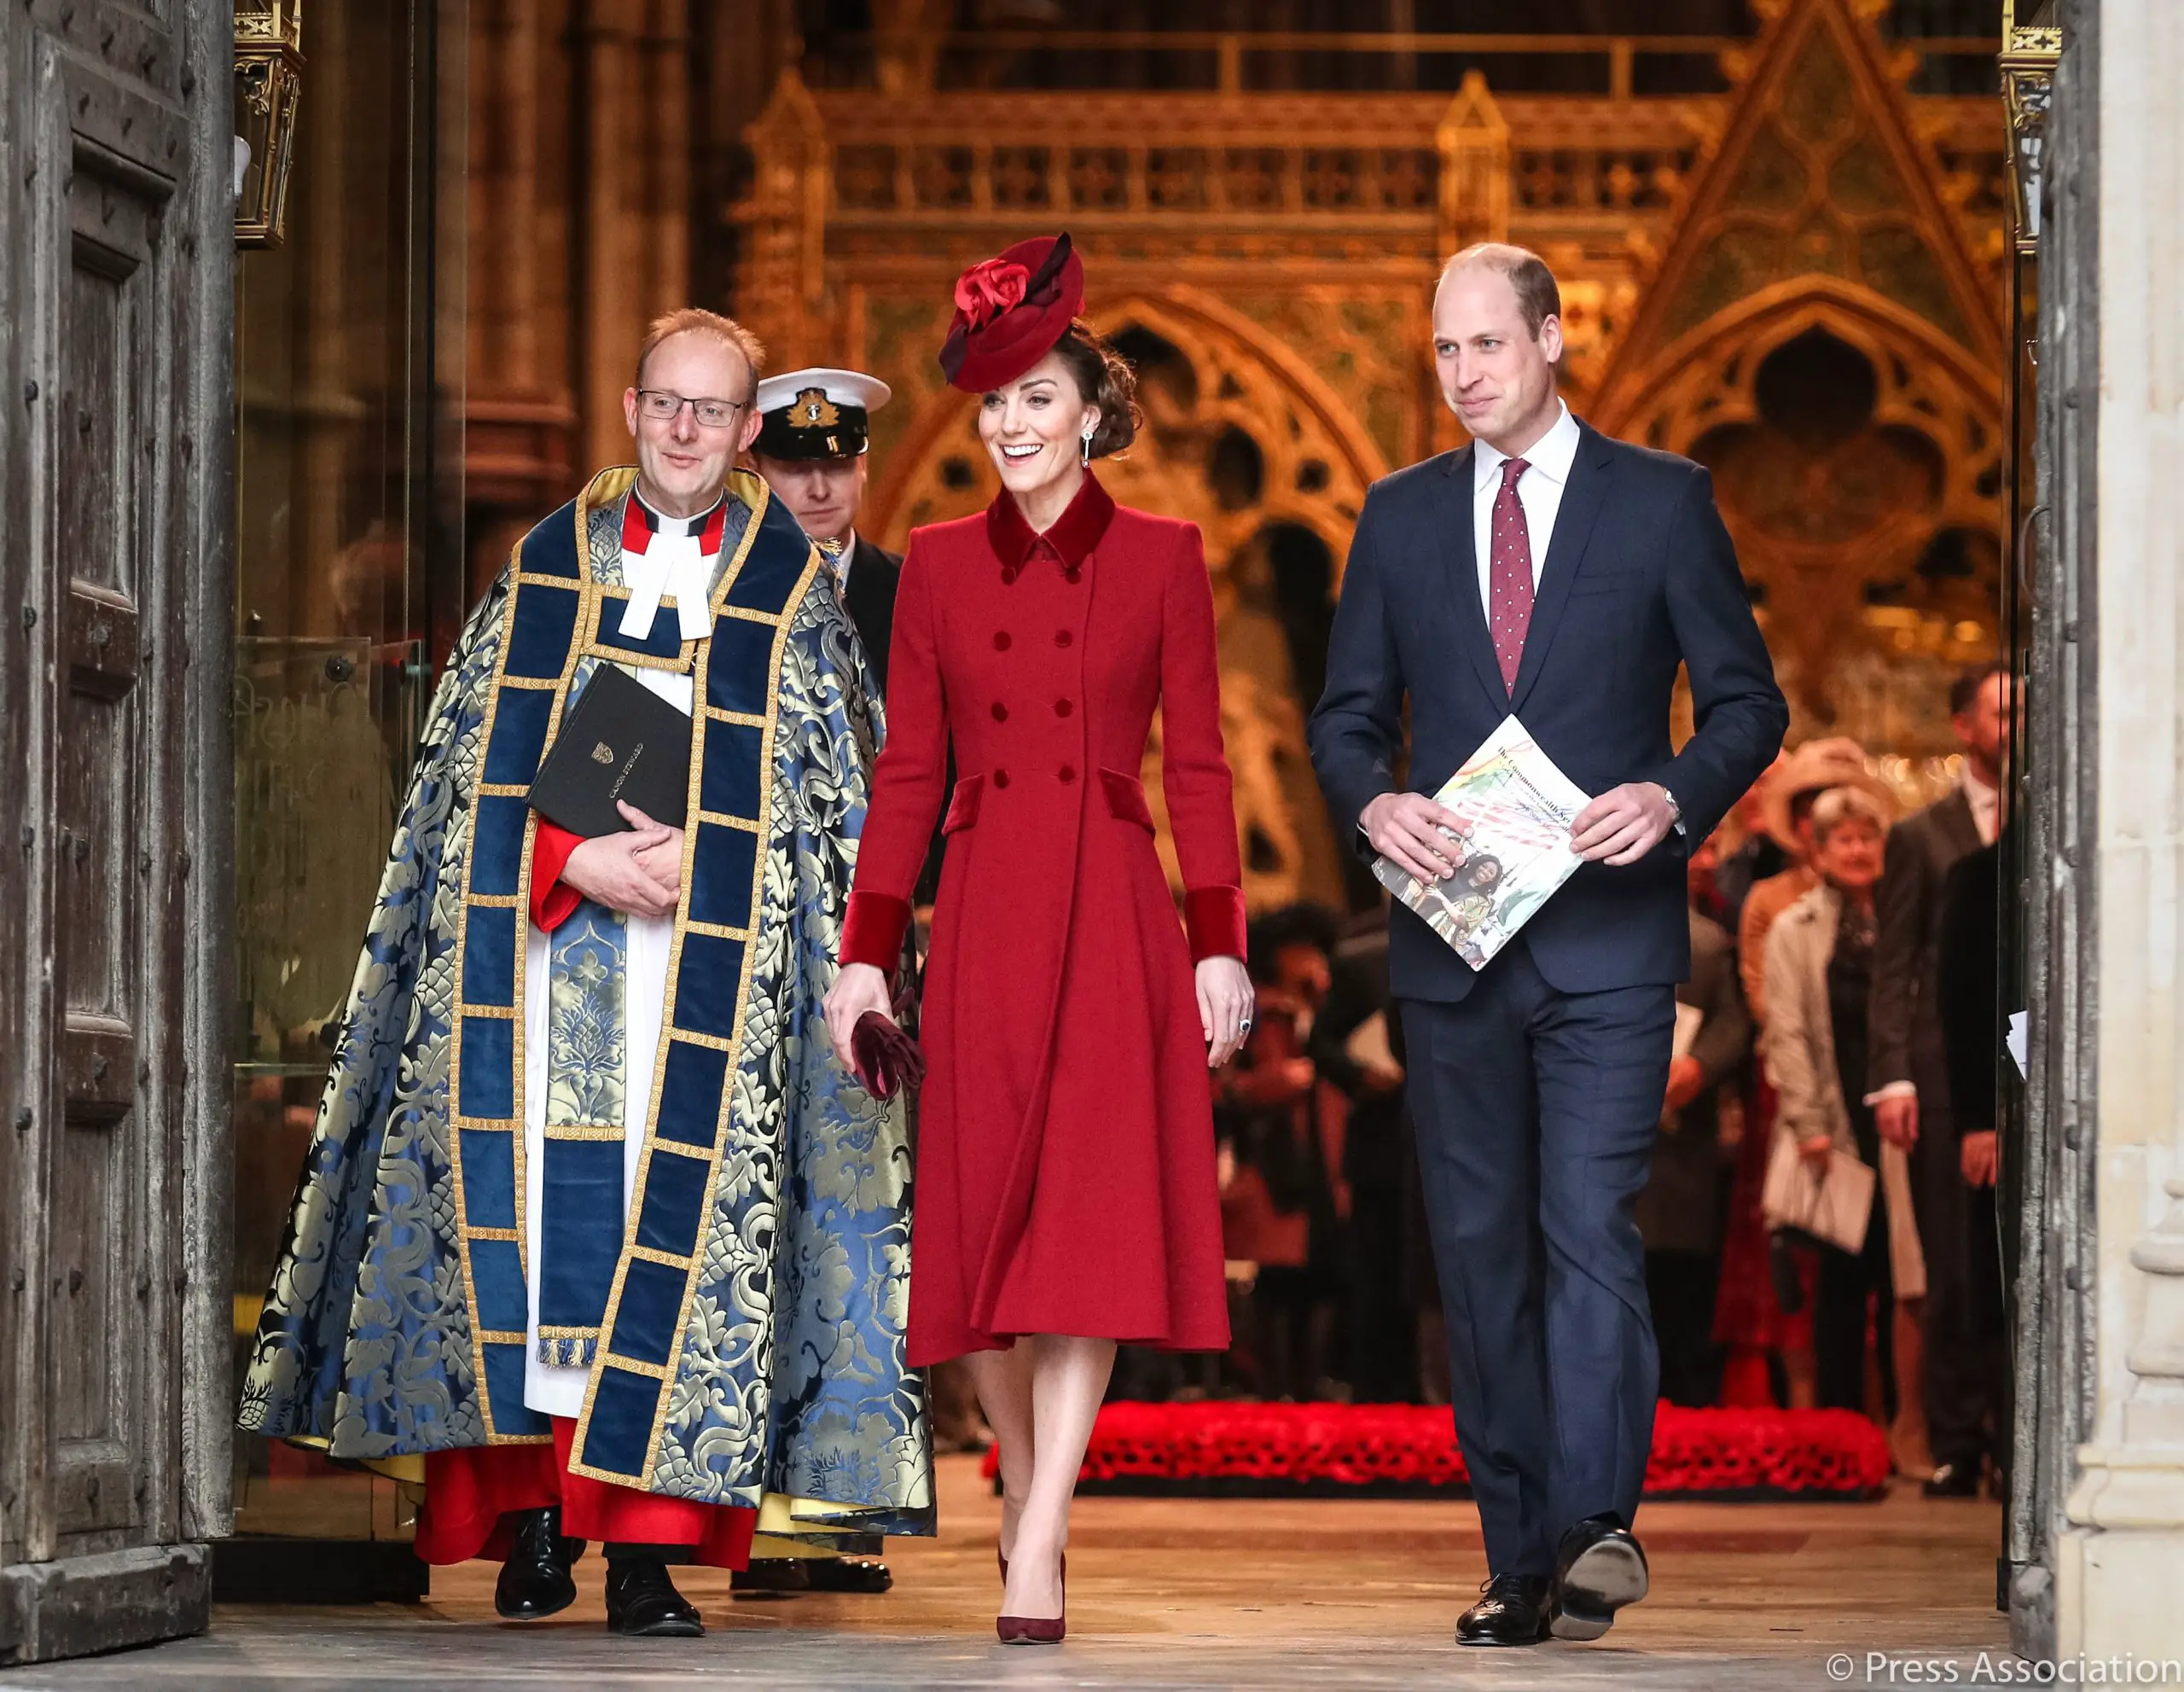 The Duchess of Cambridge chose Red and Repeat. She was wearing her red Catherine Walker coat that she first wore at the 2018 Christmas Church Service.